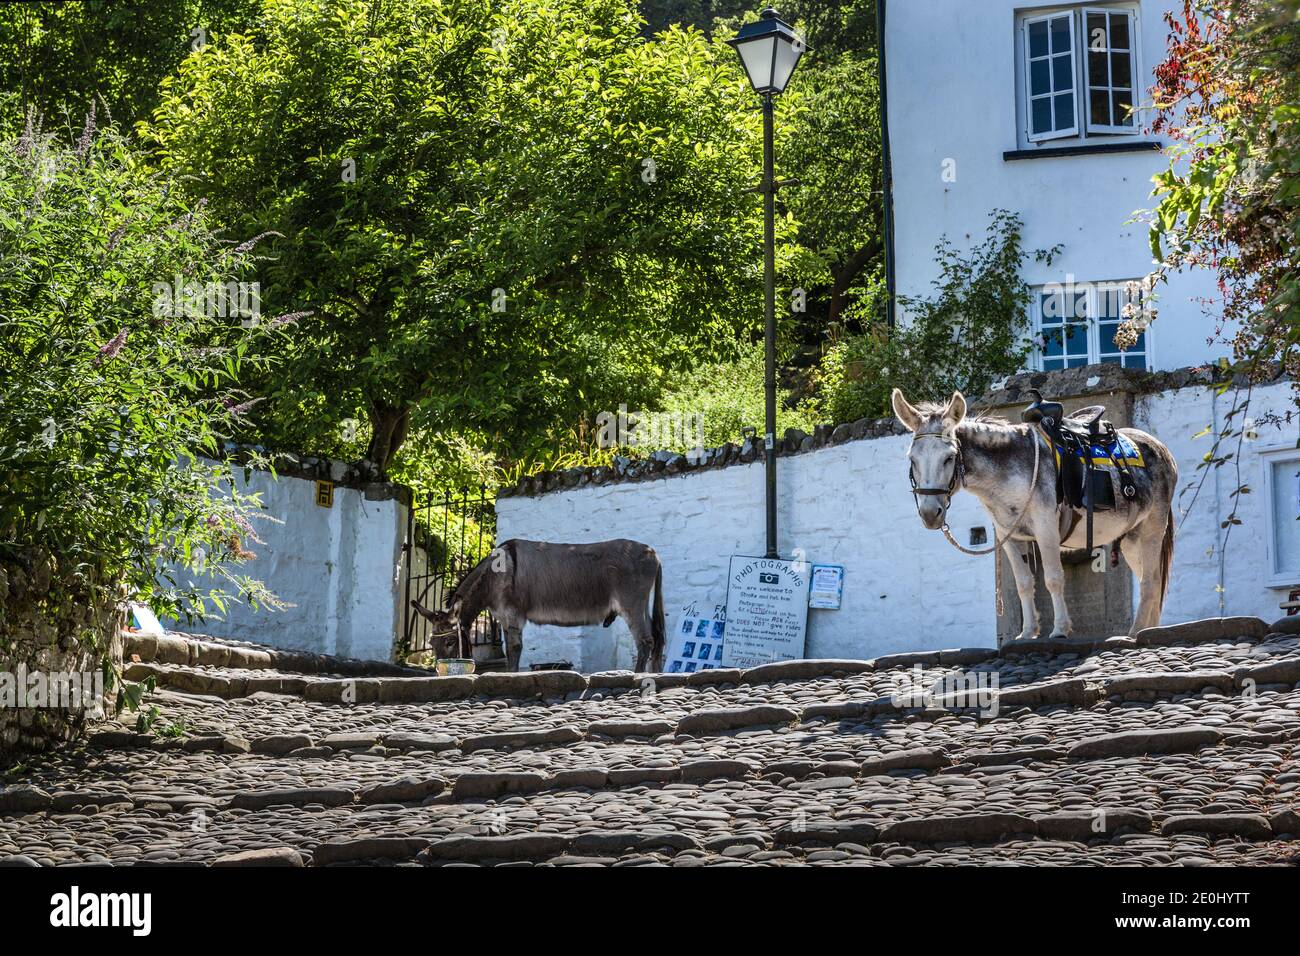 Two donkeys in the picturesque coastal village of Clovelly, North Devon, England, UK Stock Photo